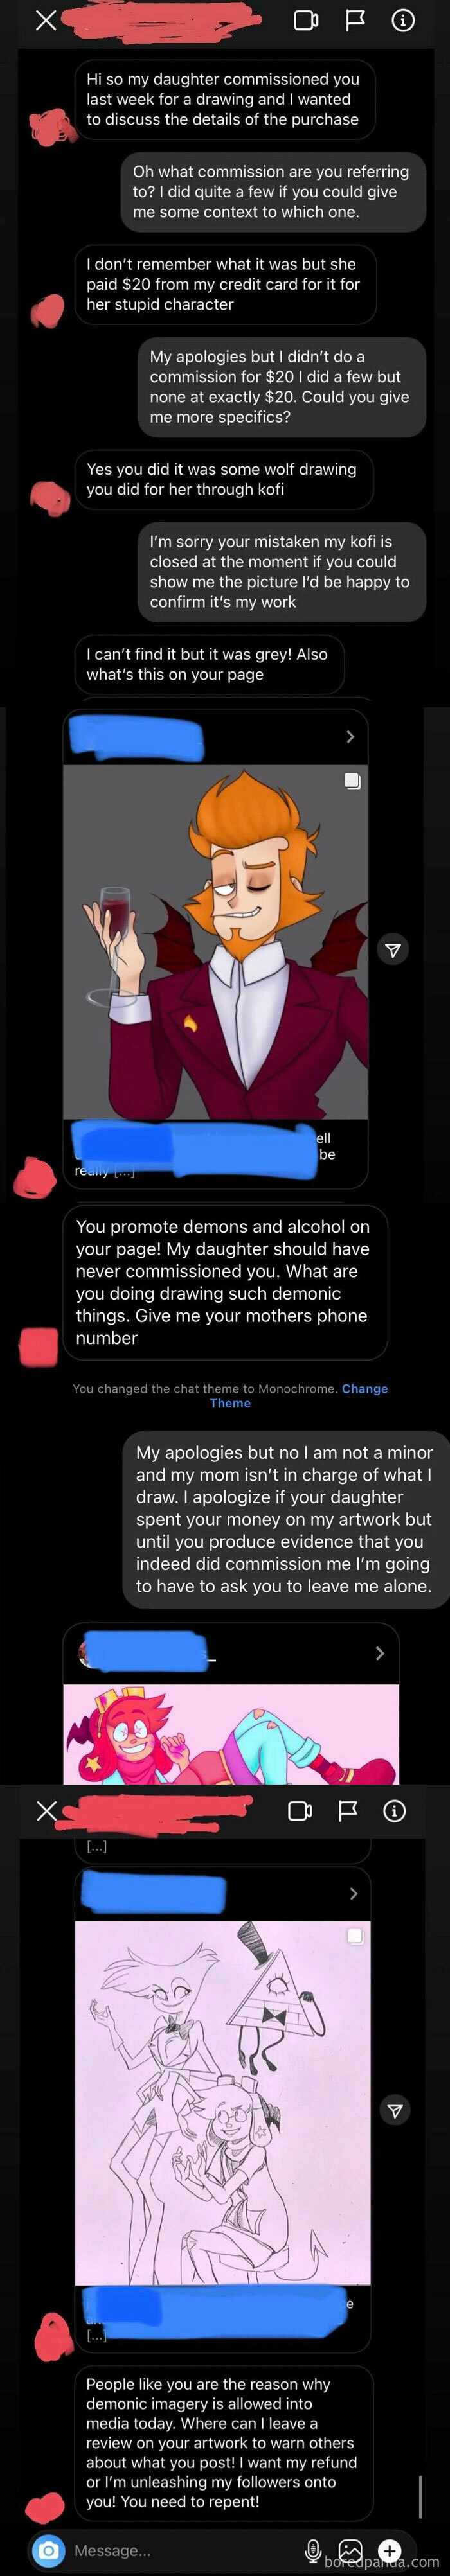 Entitled Mom Demands A Refund And Tells Me To Repent!